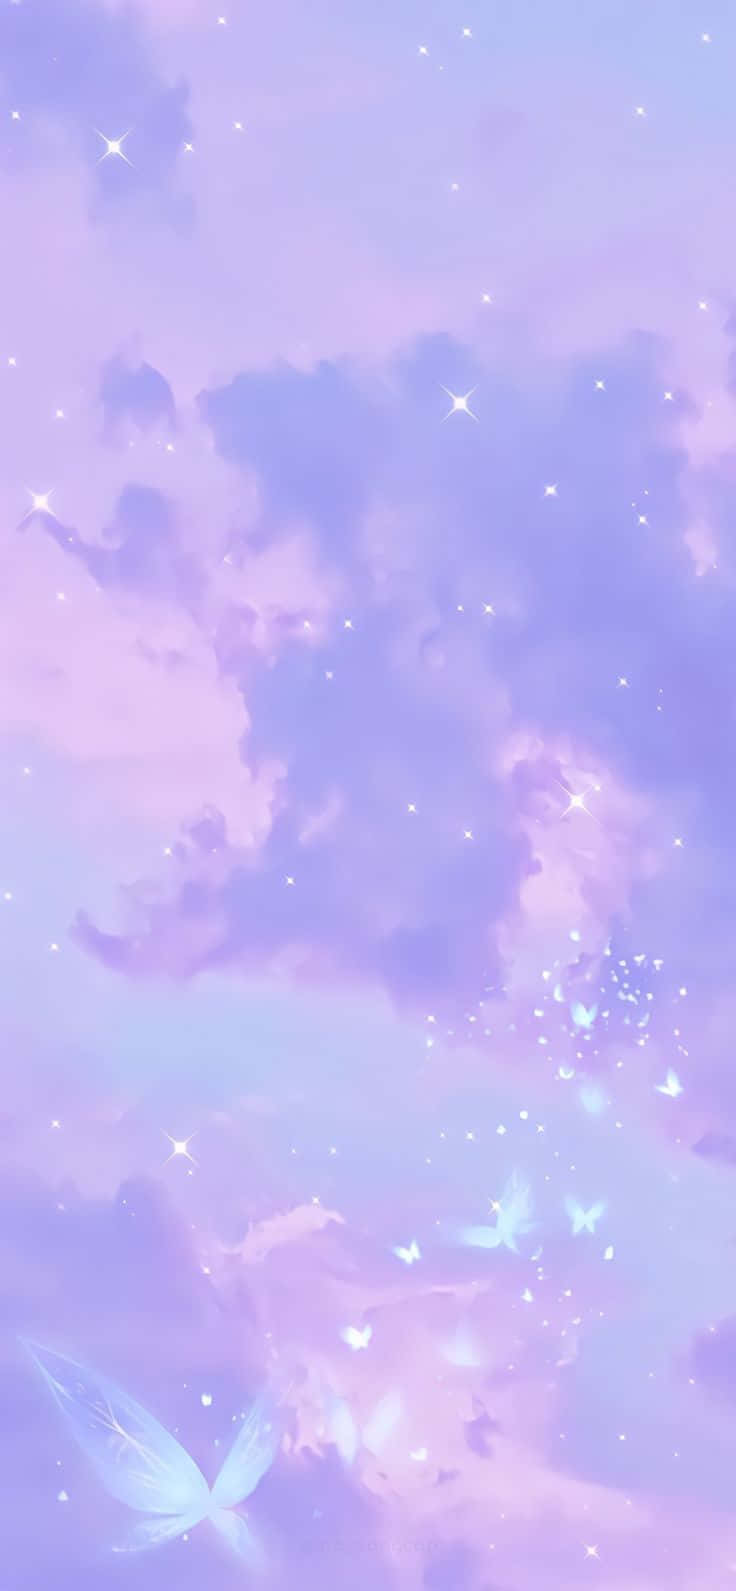 A Purple Sky With Butterflies And Stars